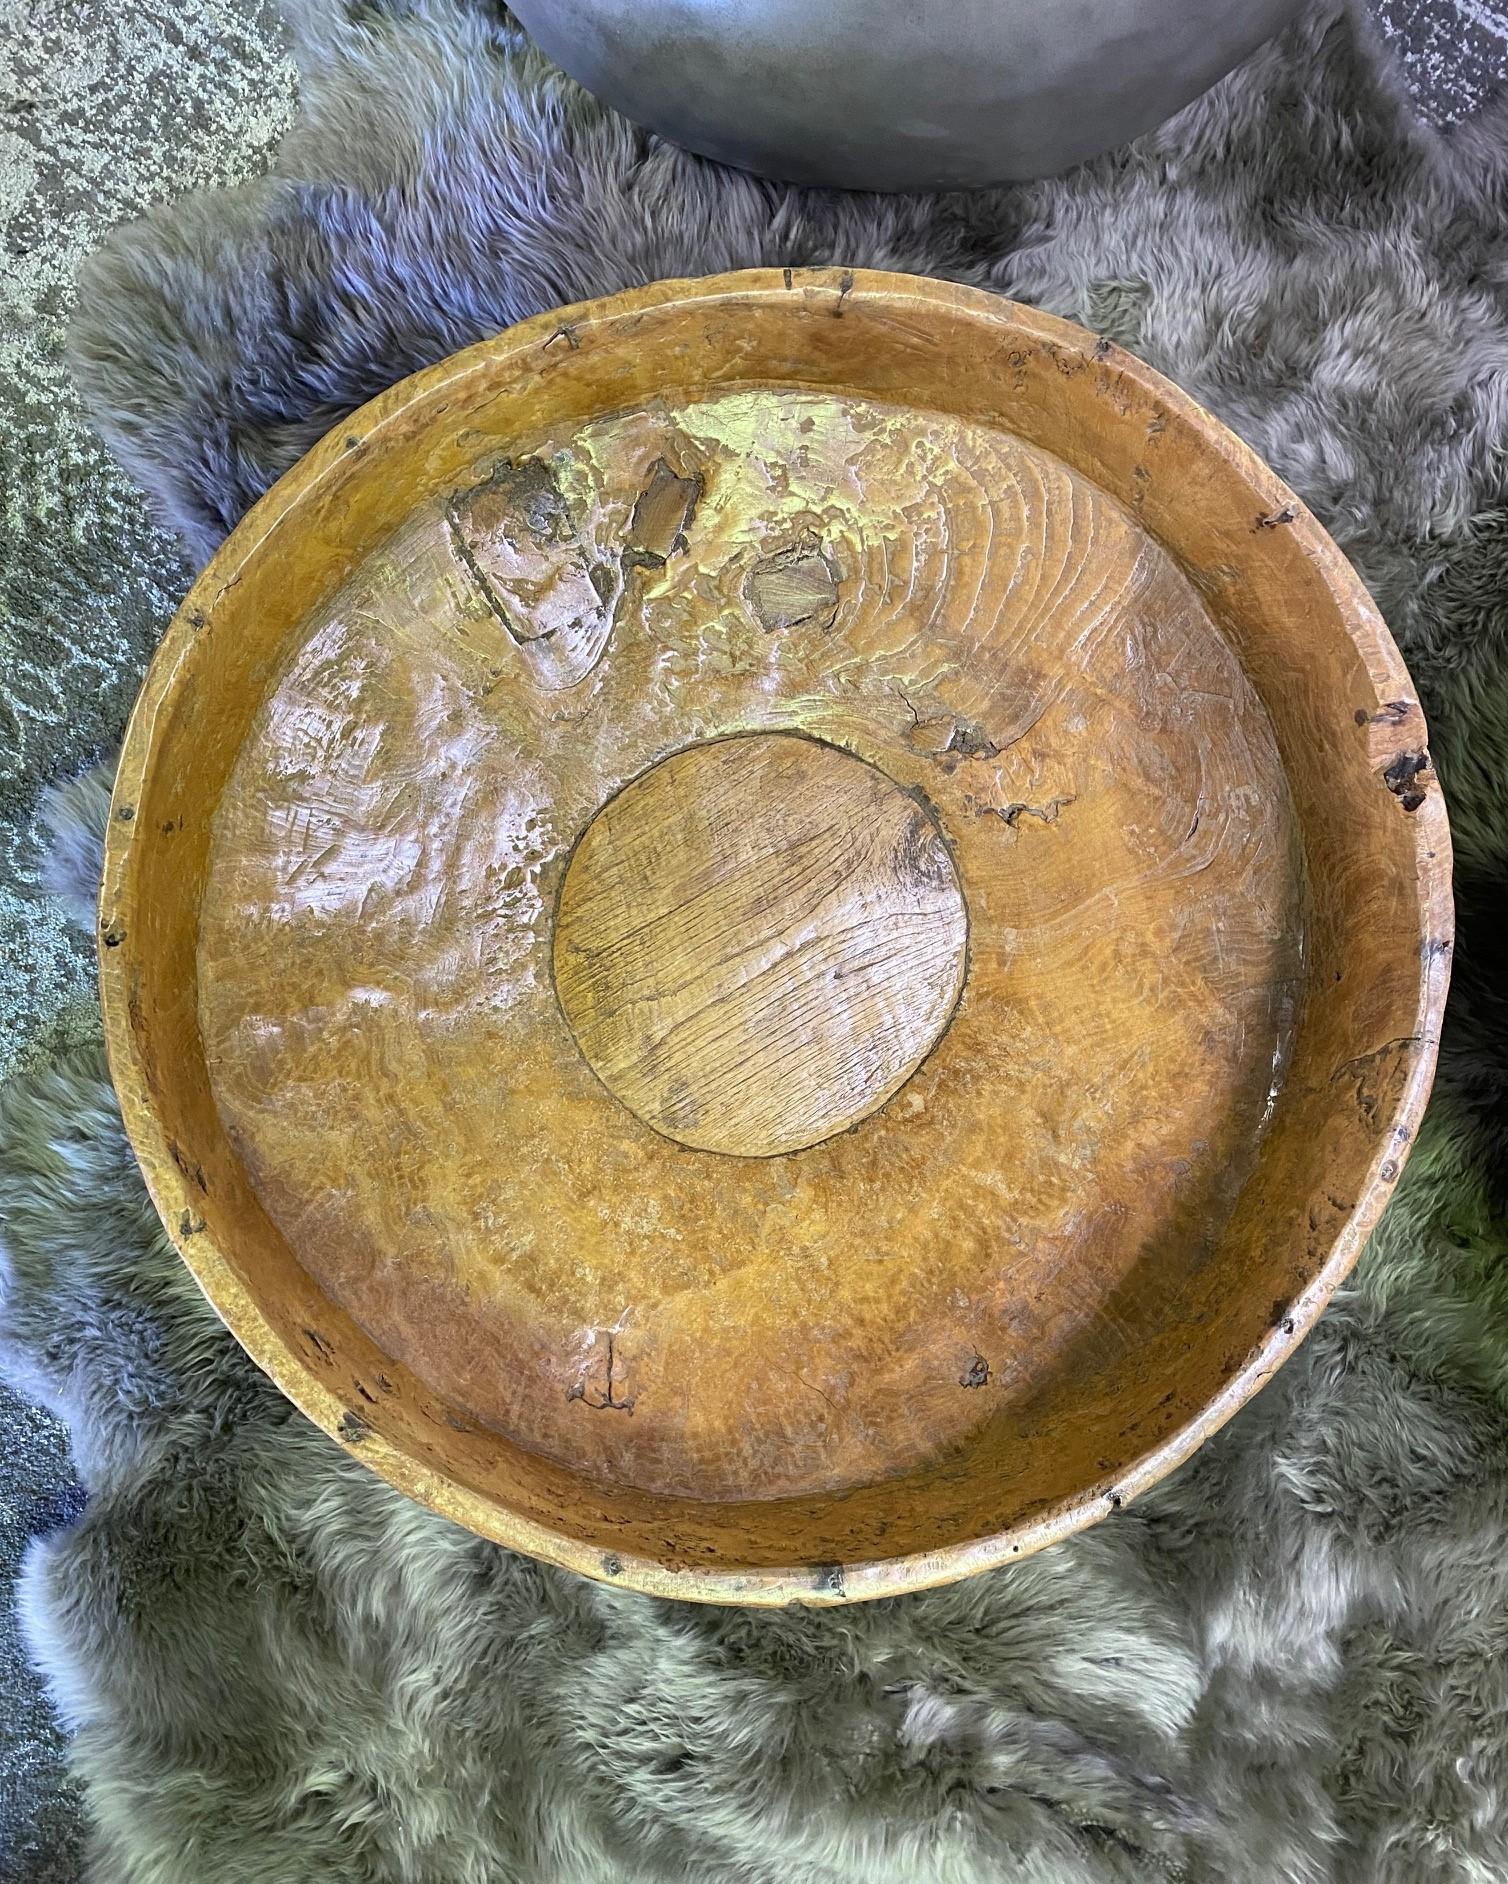 Large Heavy Monumental Massive Rustic Wood Carved Centerpiece Bowl 6